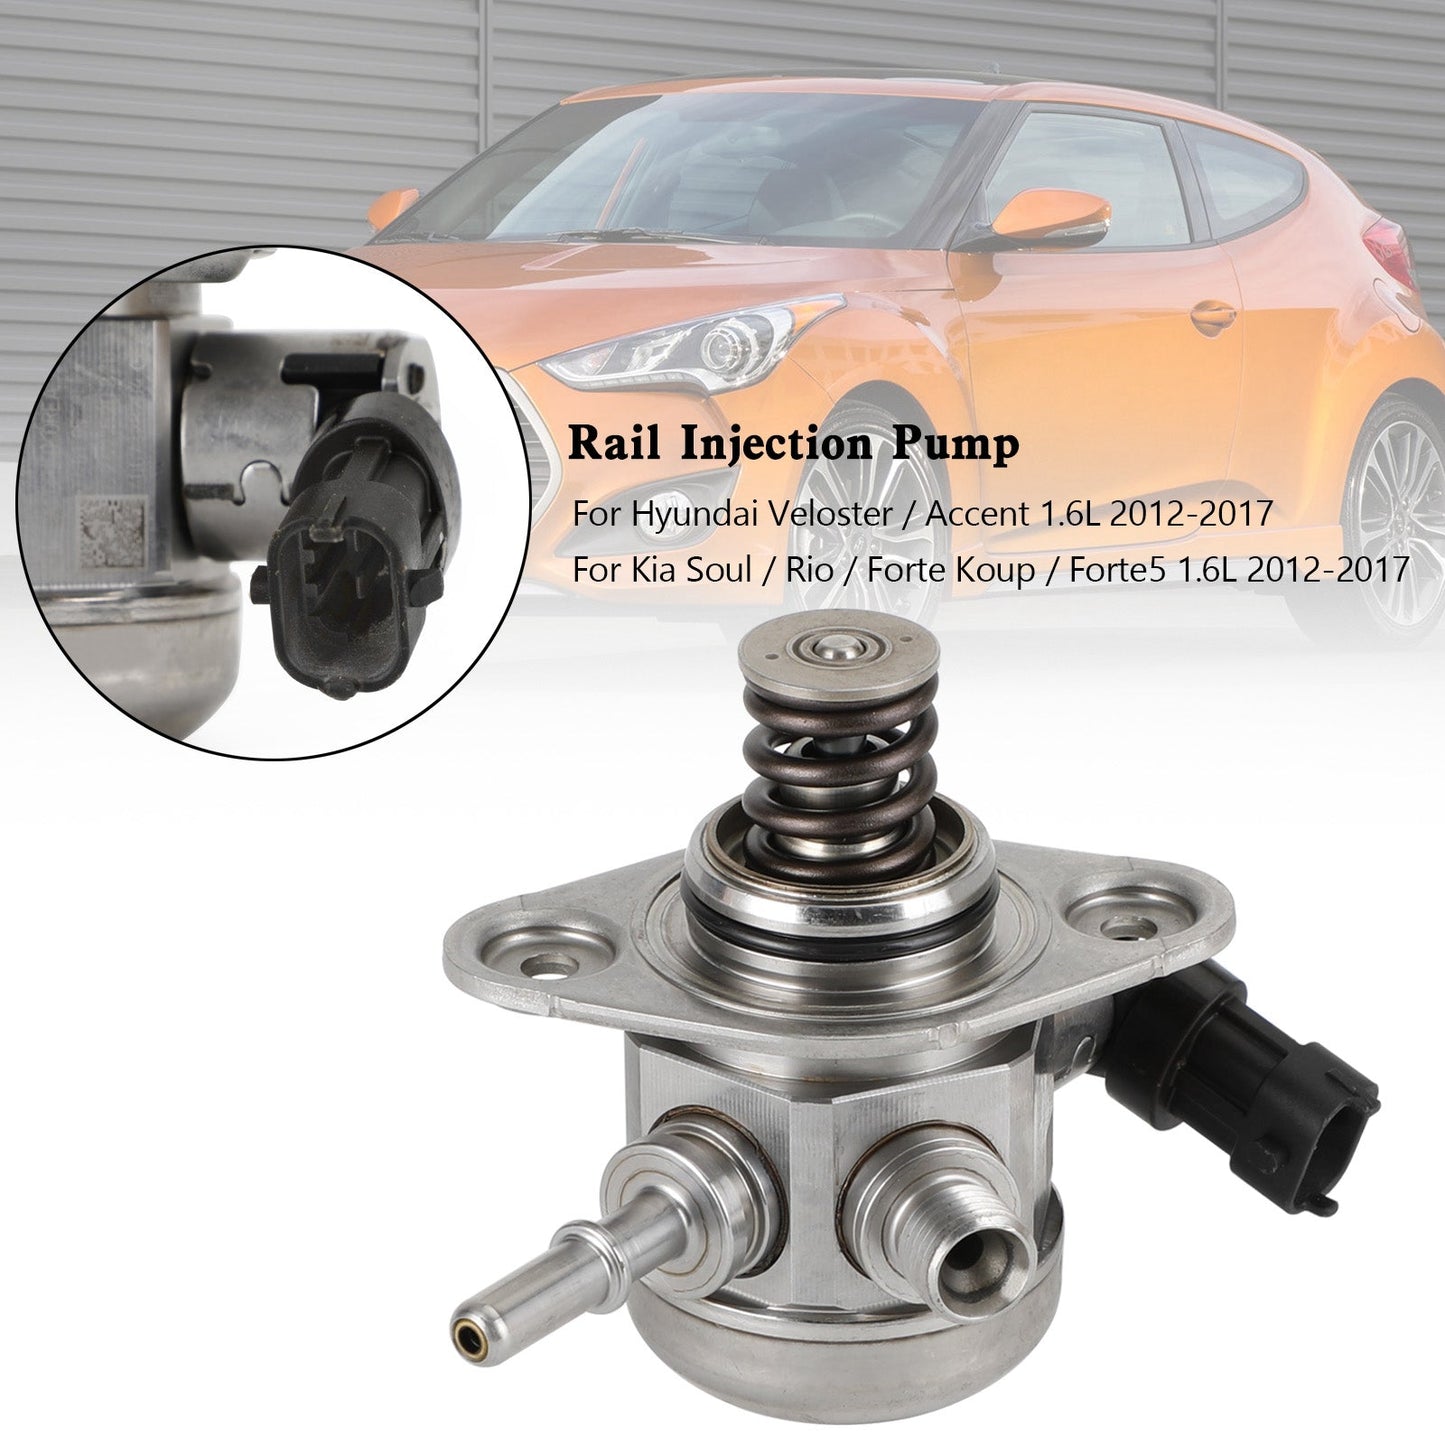 2012-2017 Hyundai Veloster Accent 1.6L Direct Injection High Pressure Fuel Pump 35320-2B220